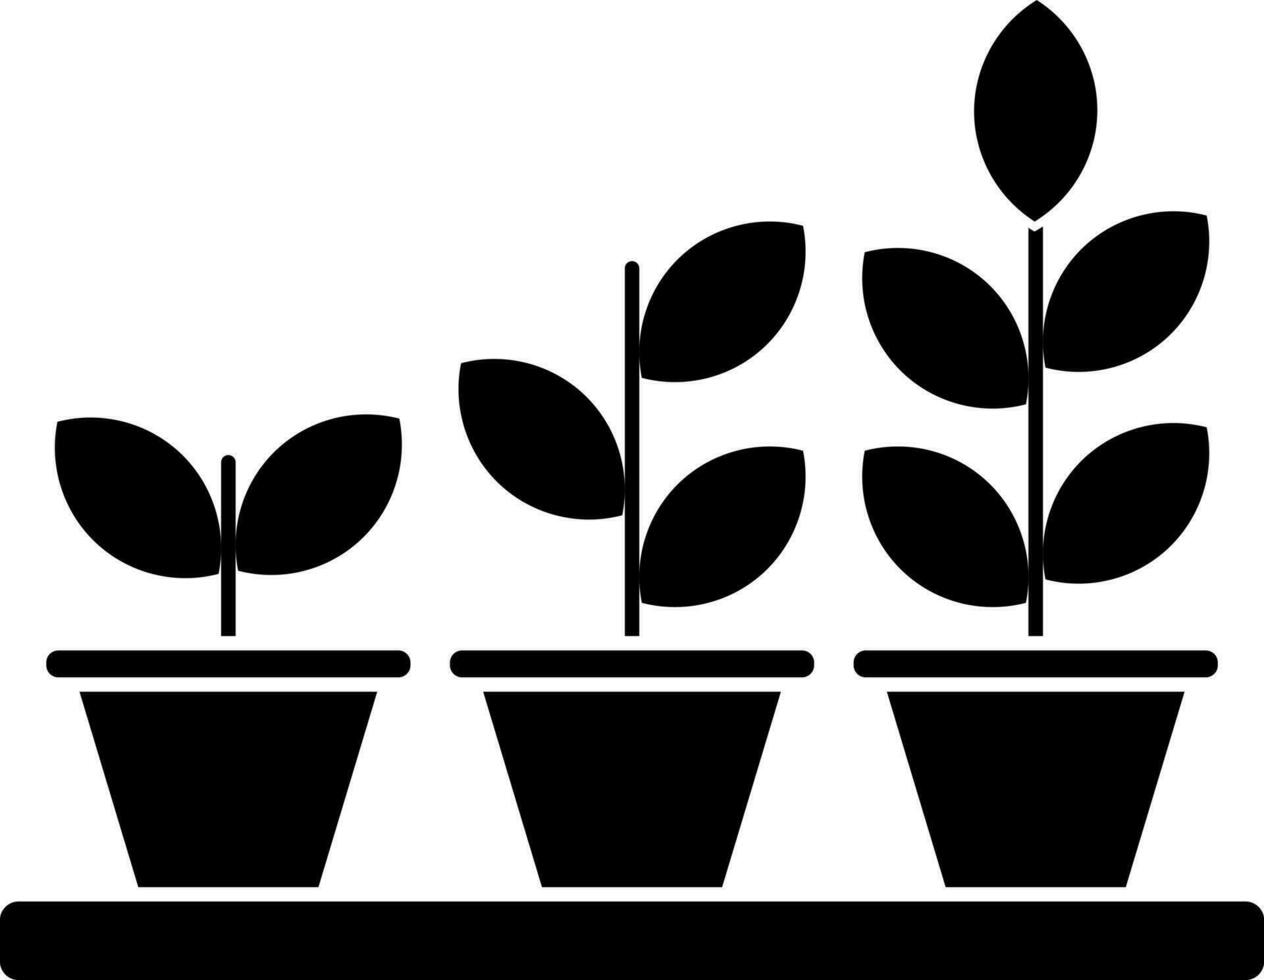 Plantation icon or symbol in flat style. vector